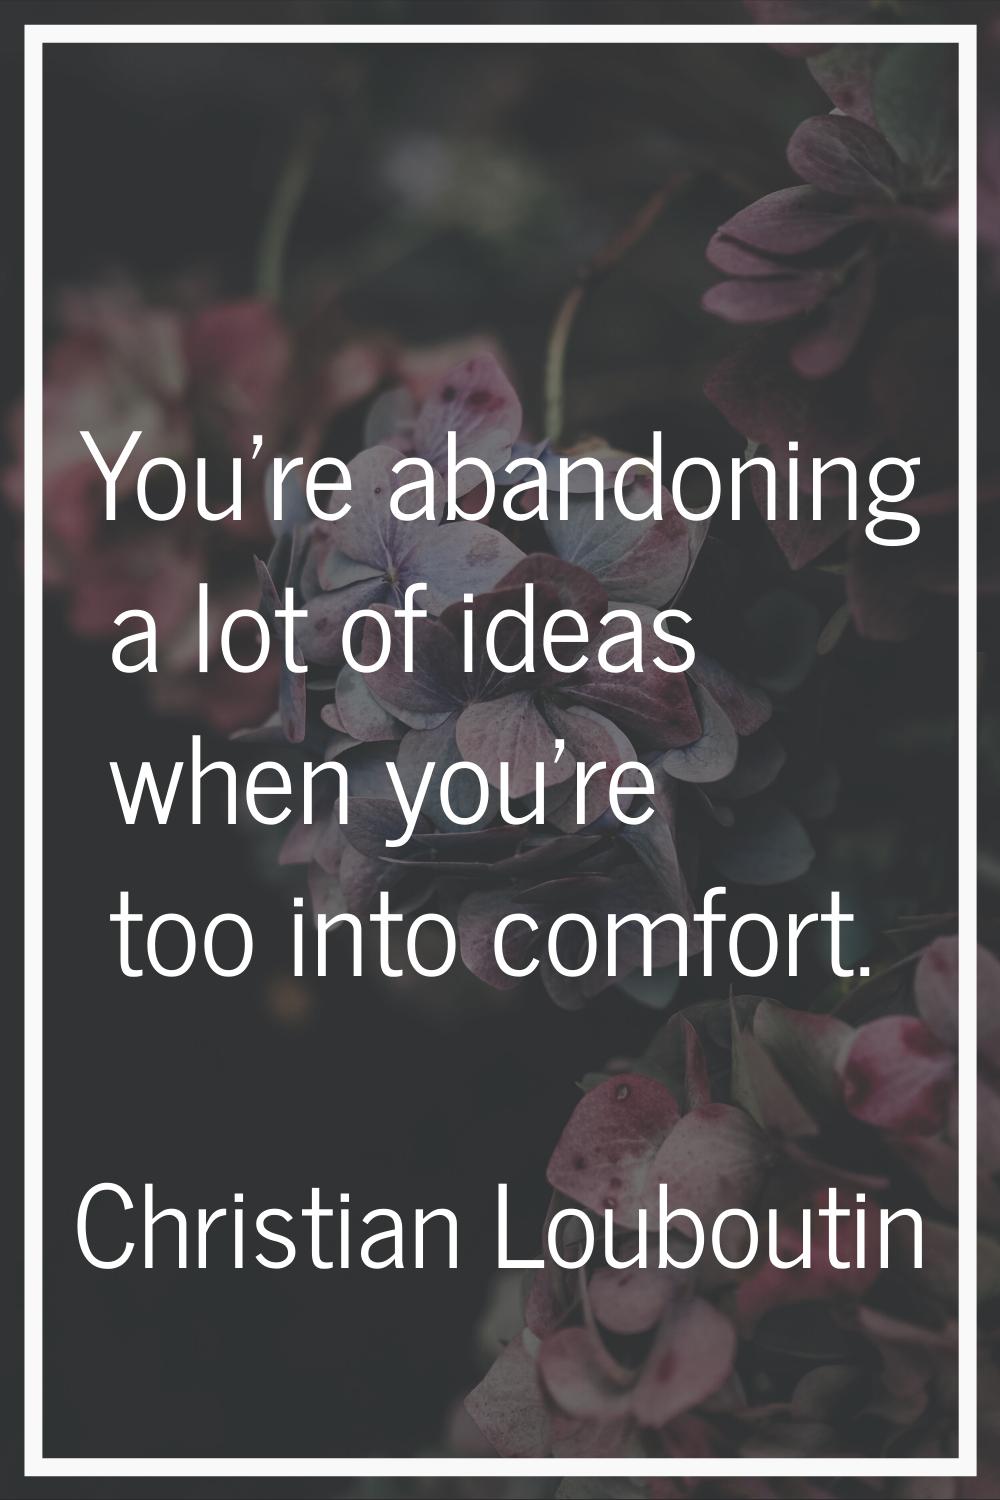 You're abandoning a lot of ideas when you're too into comfort.